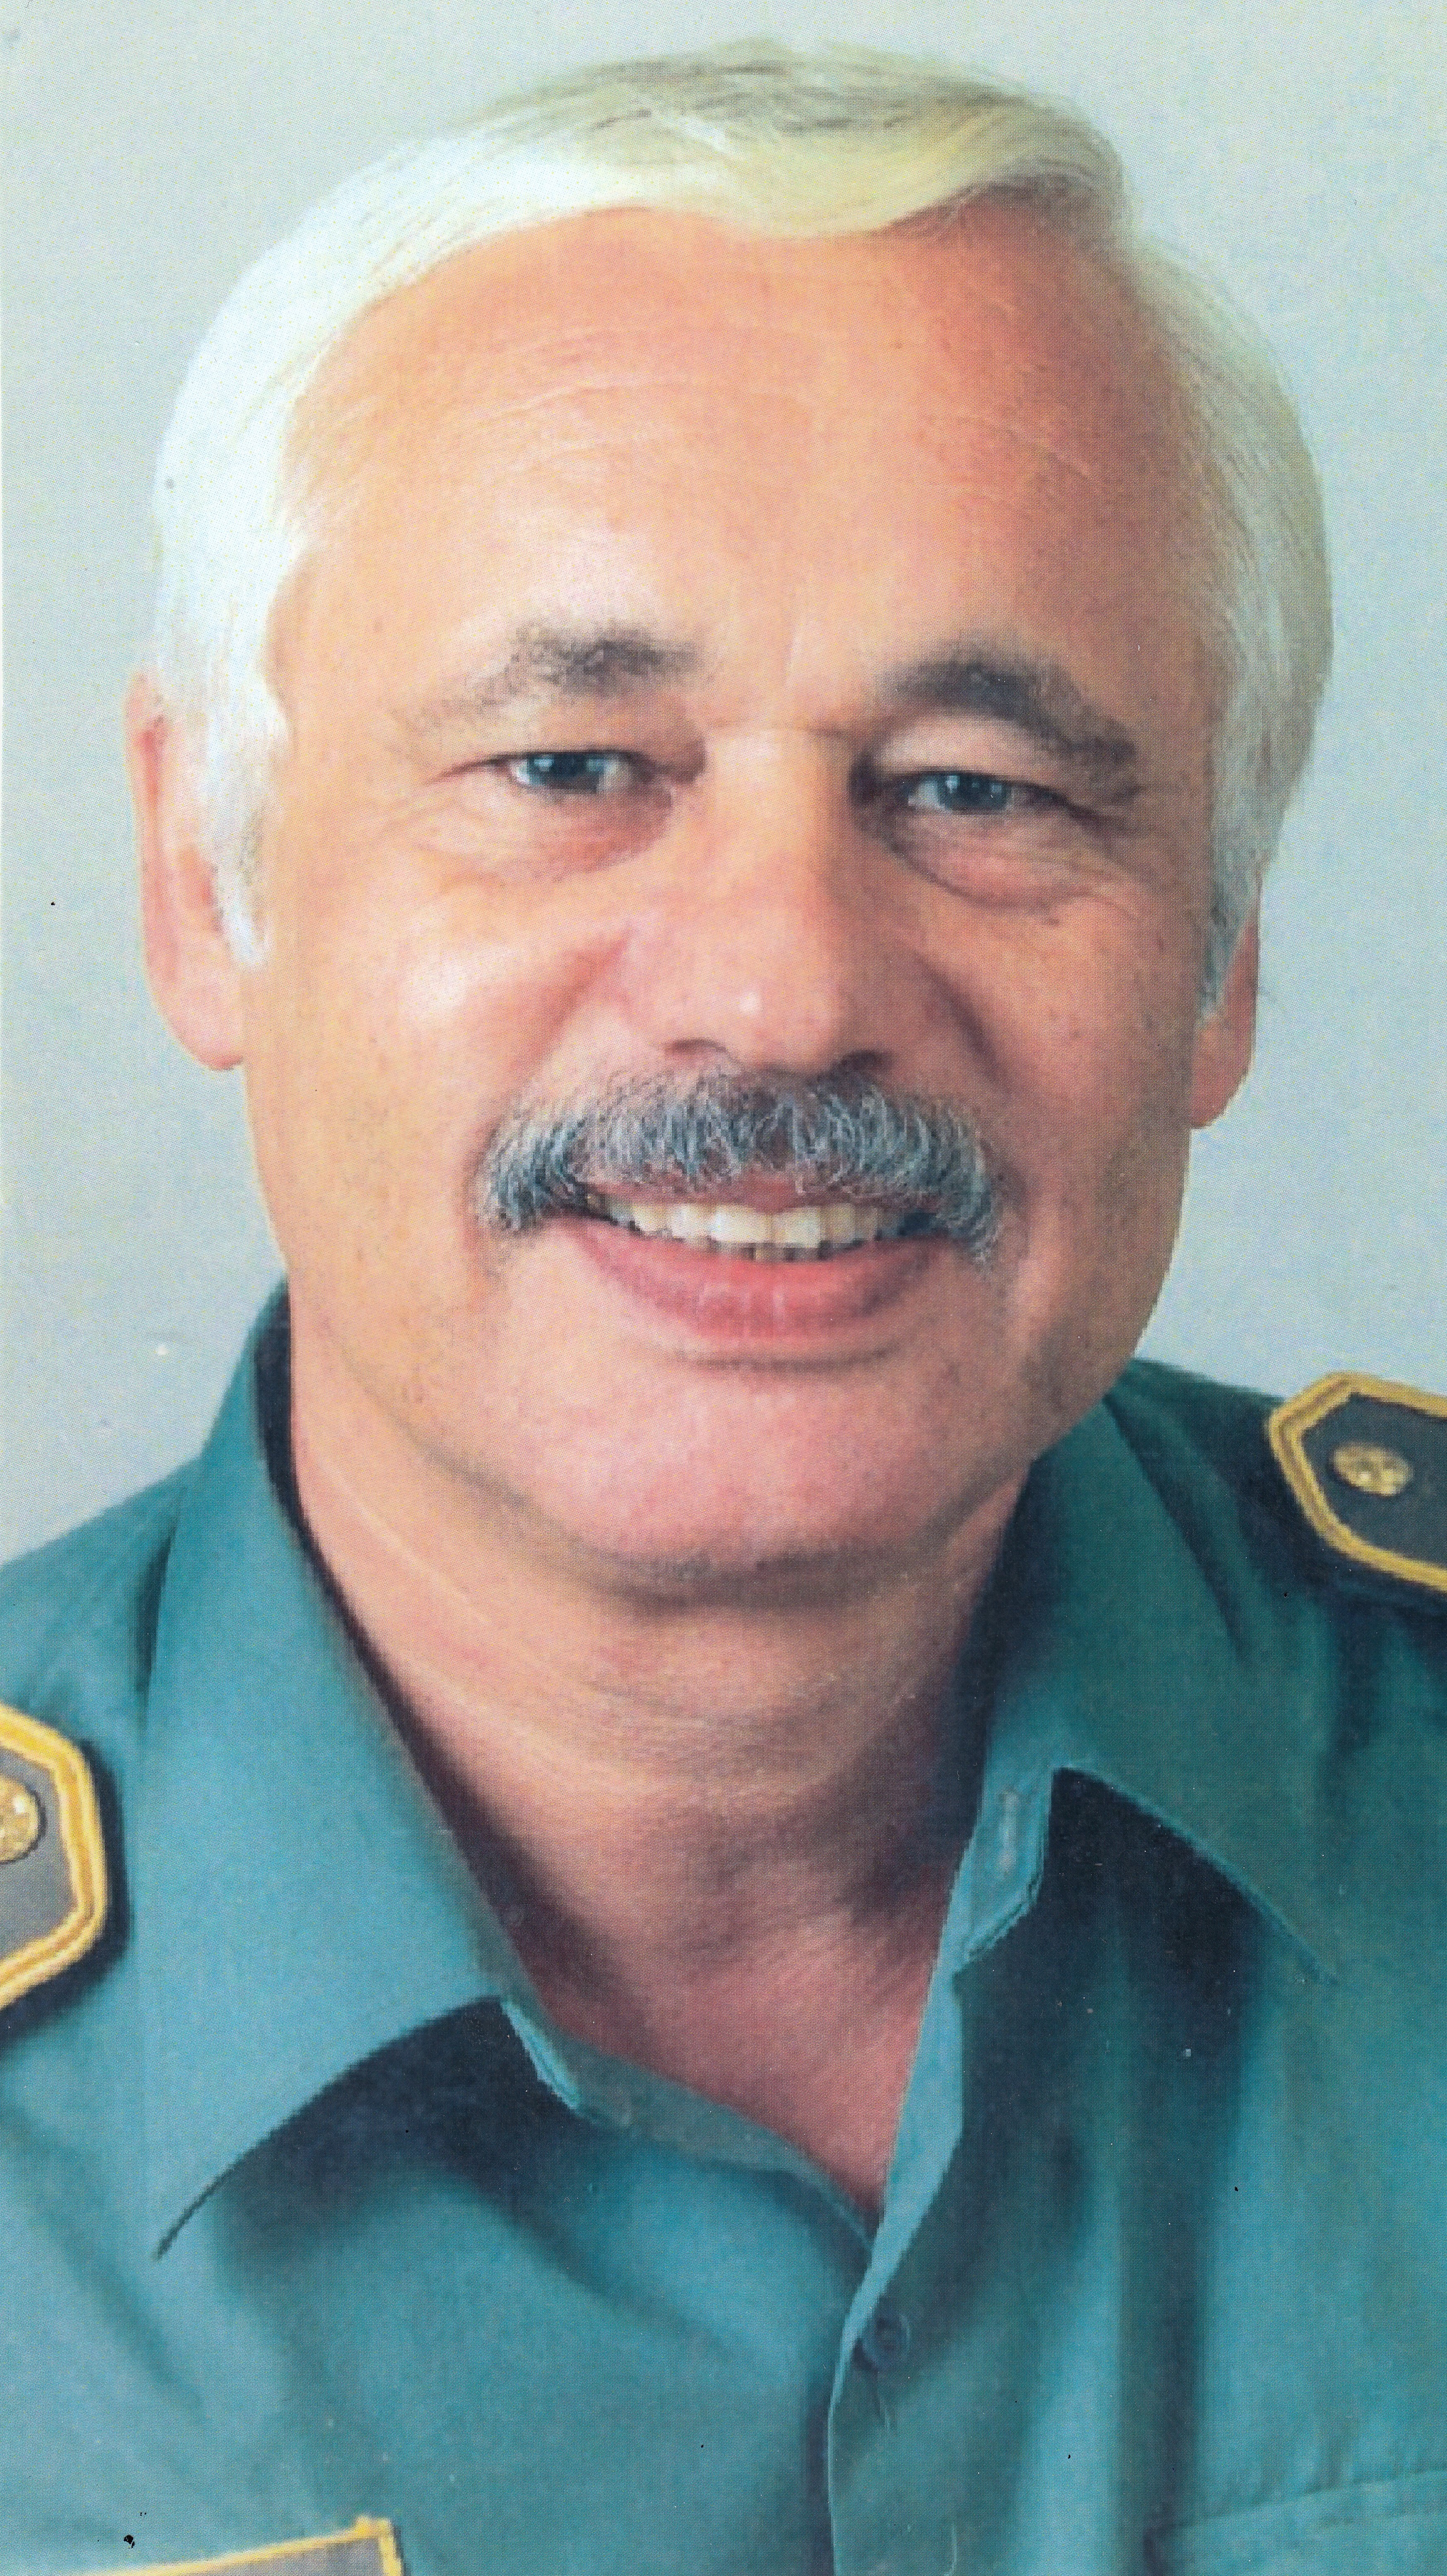 Colonel Ctirad Doubek after his reactivation in 1990